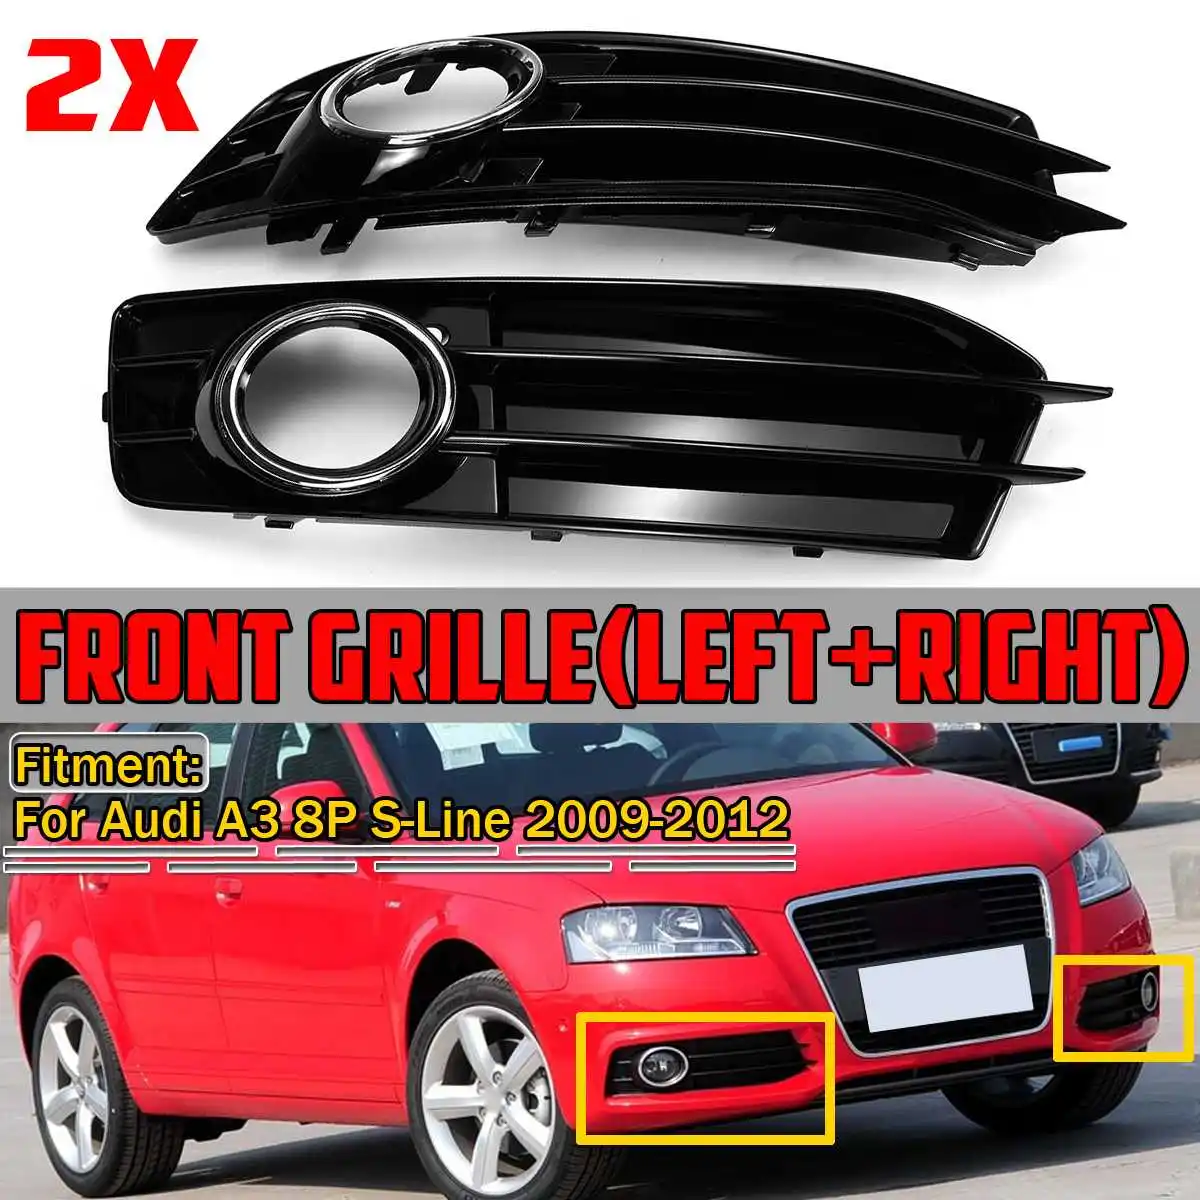 

Chrome Silver/Black 2xCar Front Fog Light Grille Cover Fog Lamp Grille Grill For Audi A3 8P S-Line 2009-2012 8P0807682 8P0807681